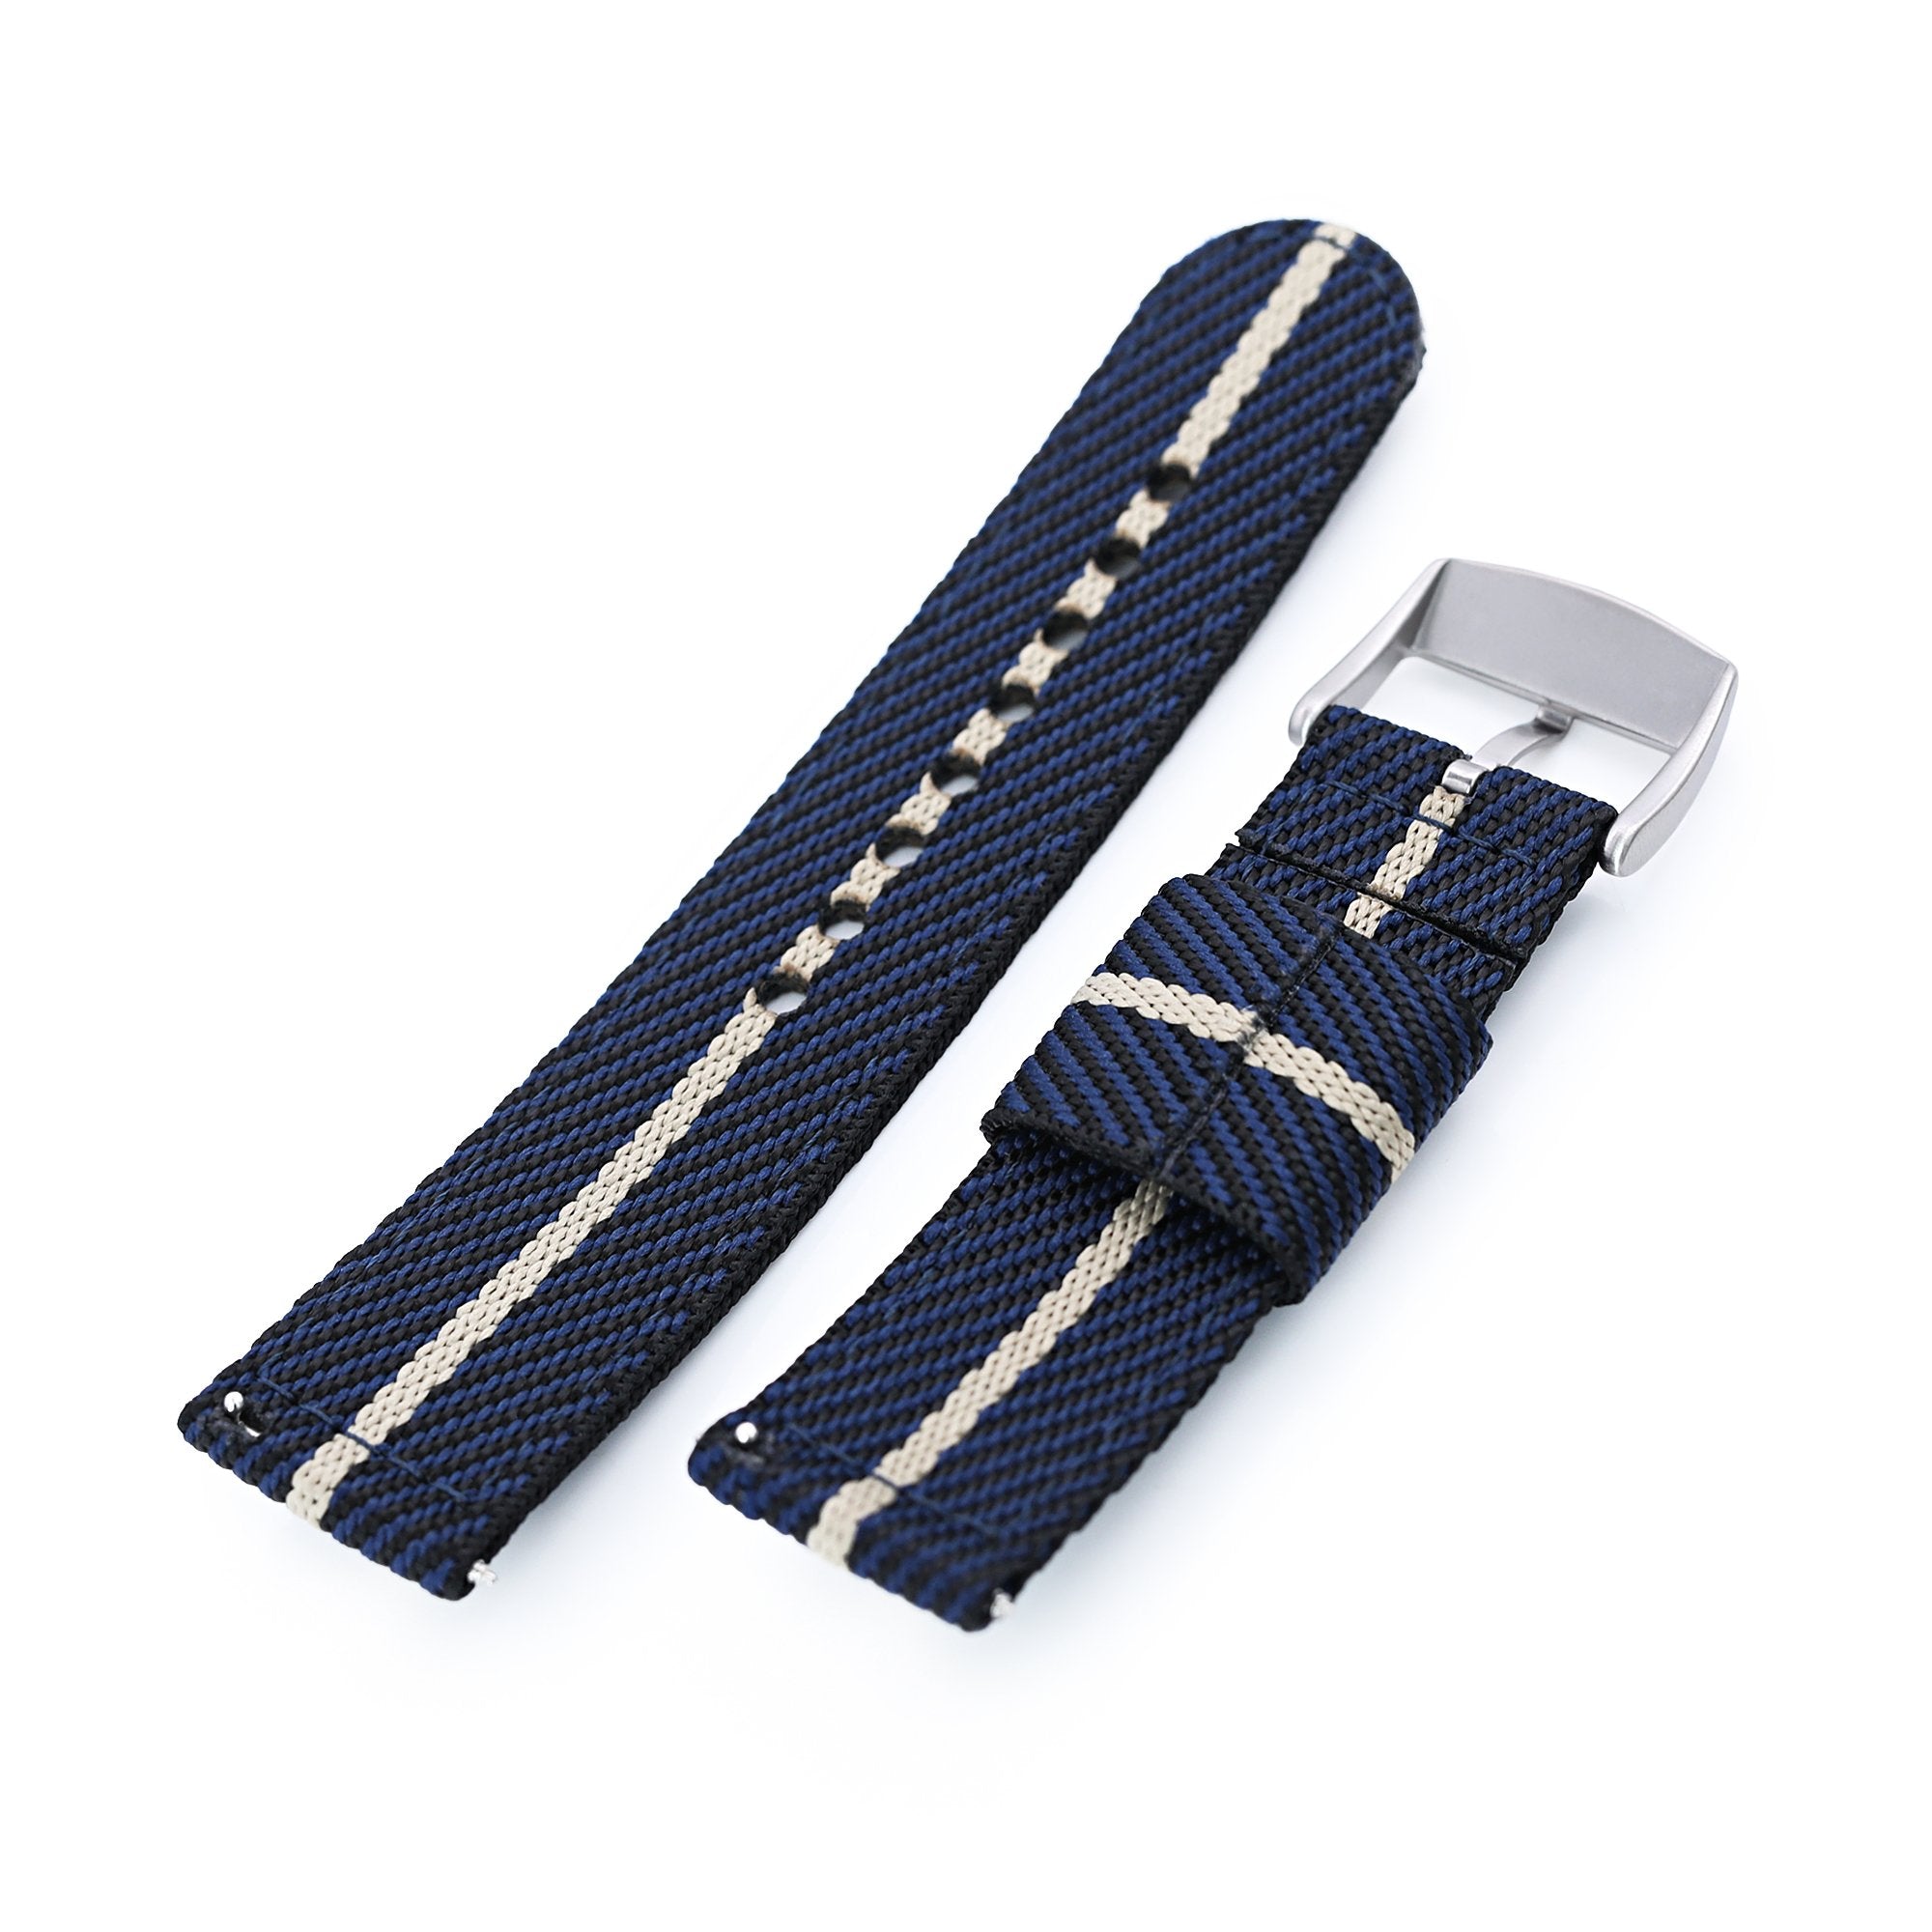 22mm 2-pcs Nylon Watch Band, Quick Release, Blue & Khaki, Brushed Buckle Strapcode Watch Bands